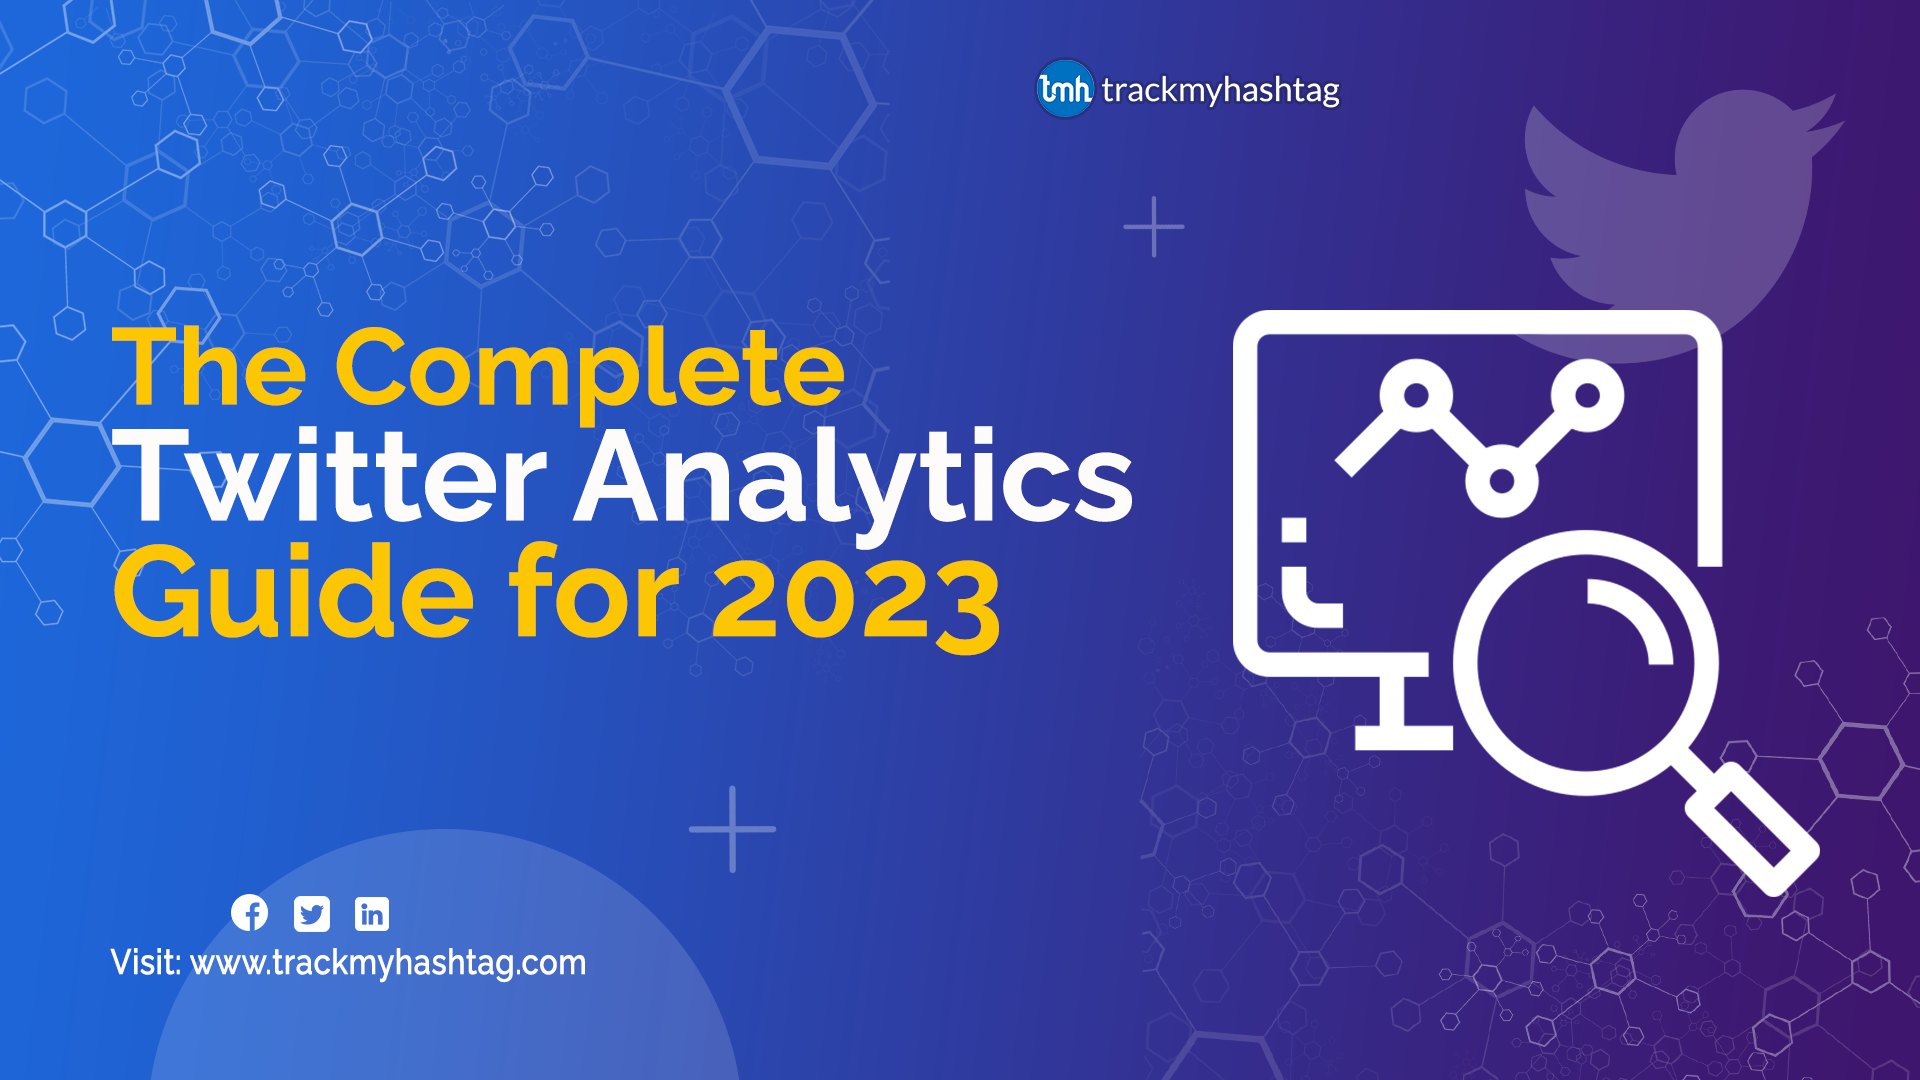 The Complete Twitter Analytics Guide for 2023